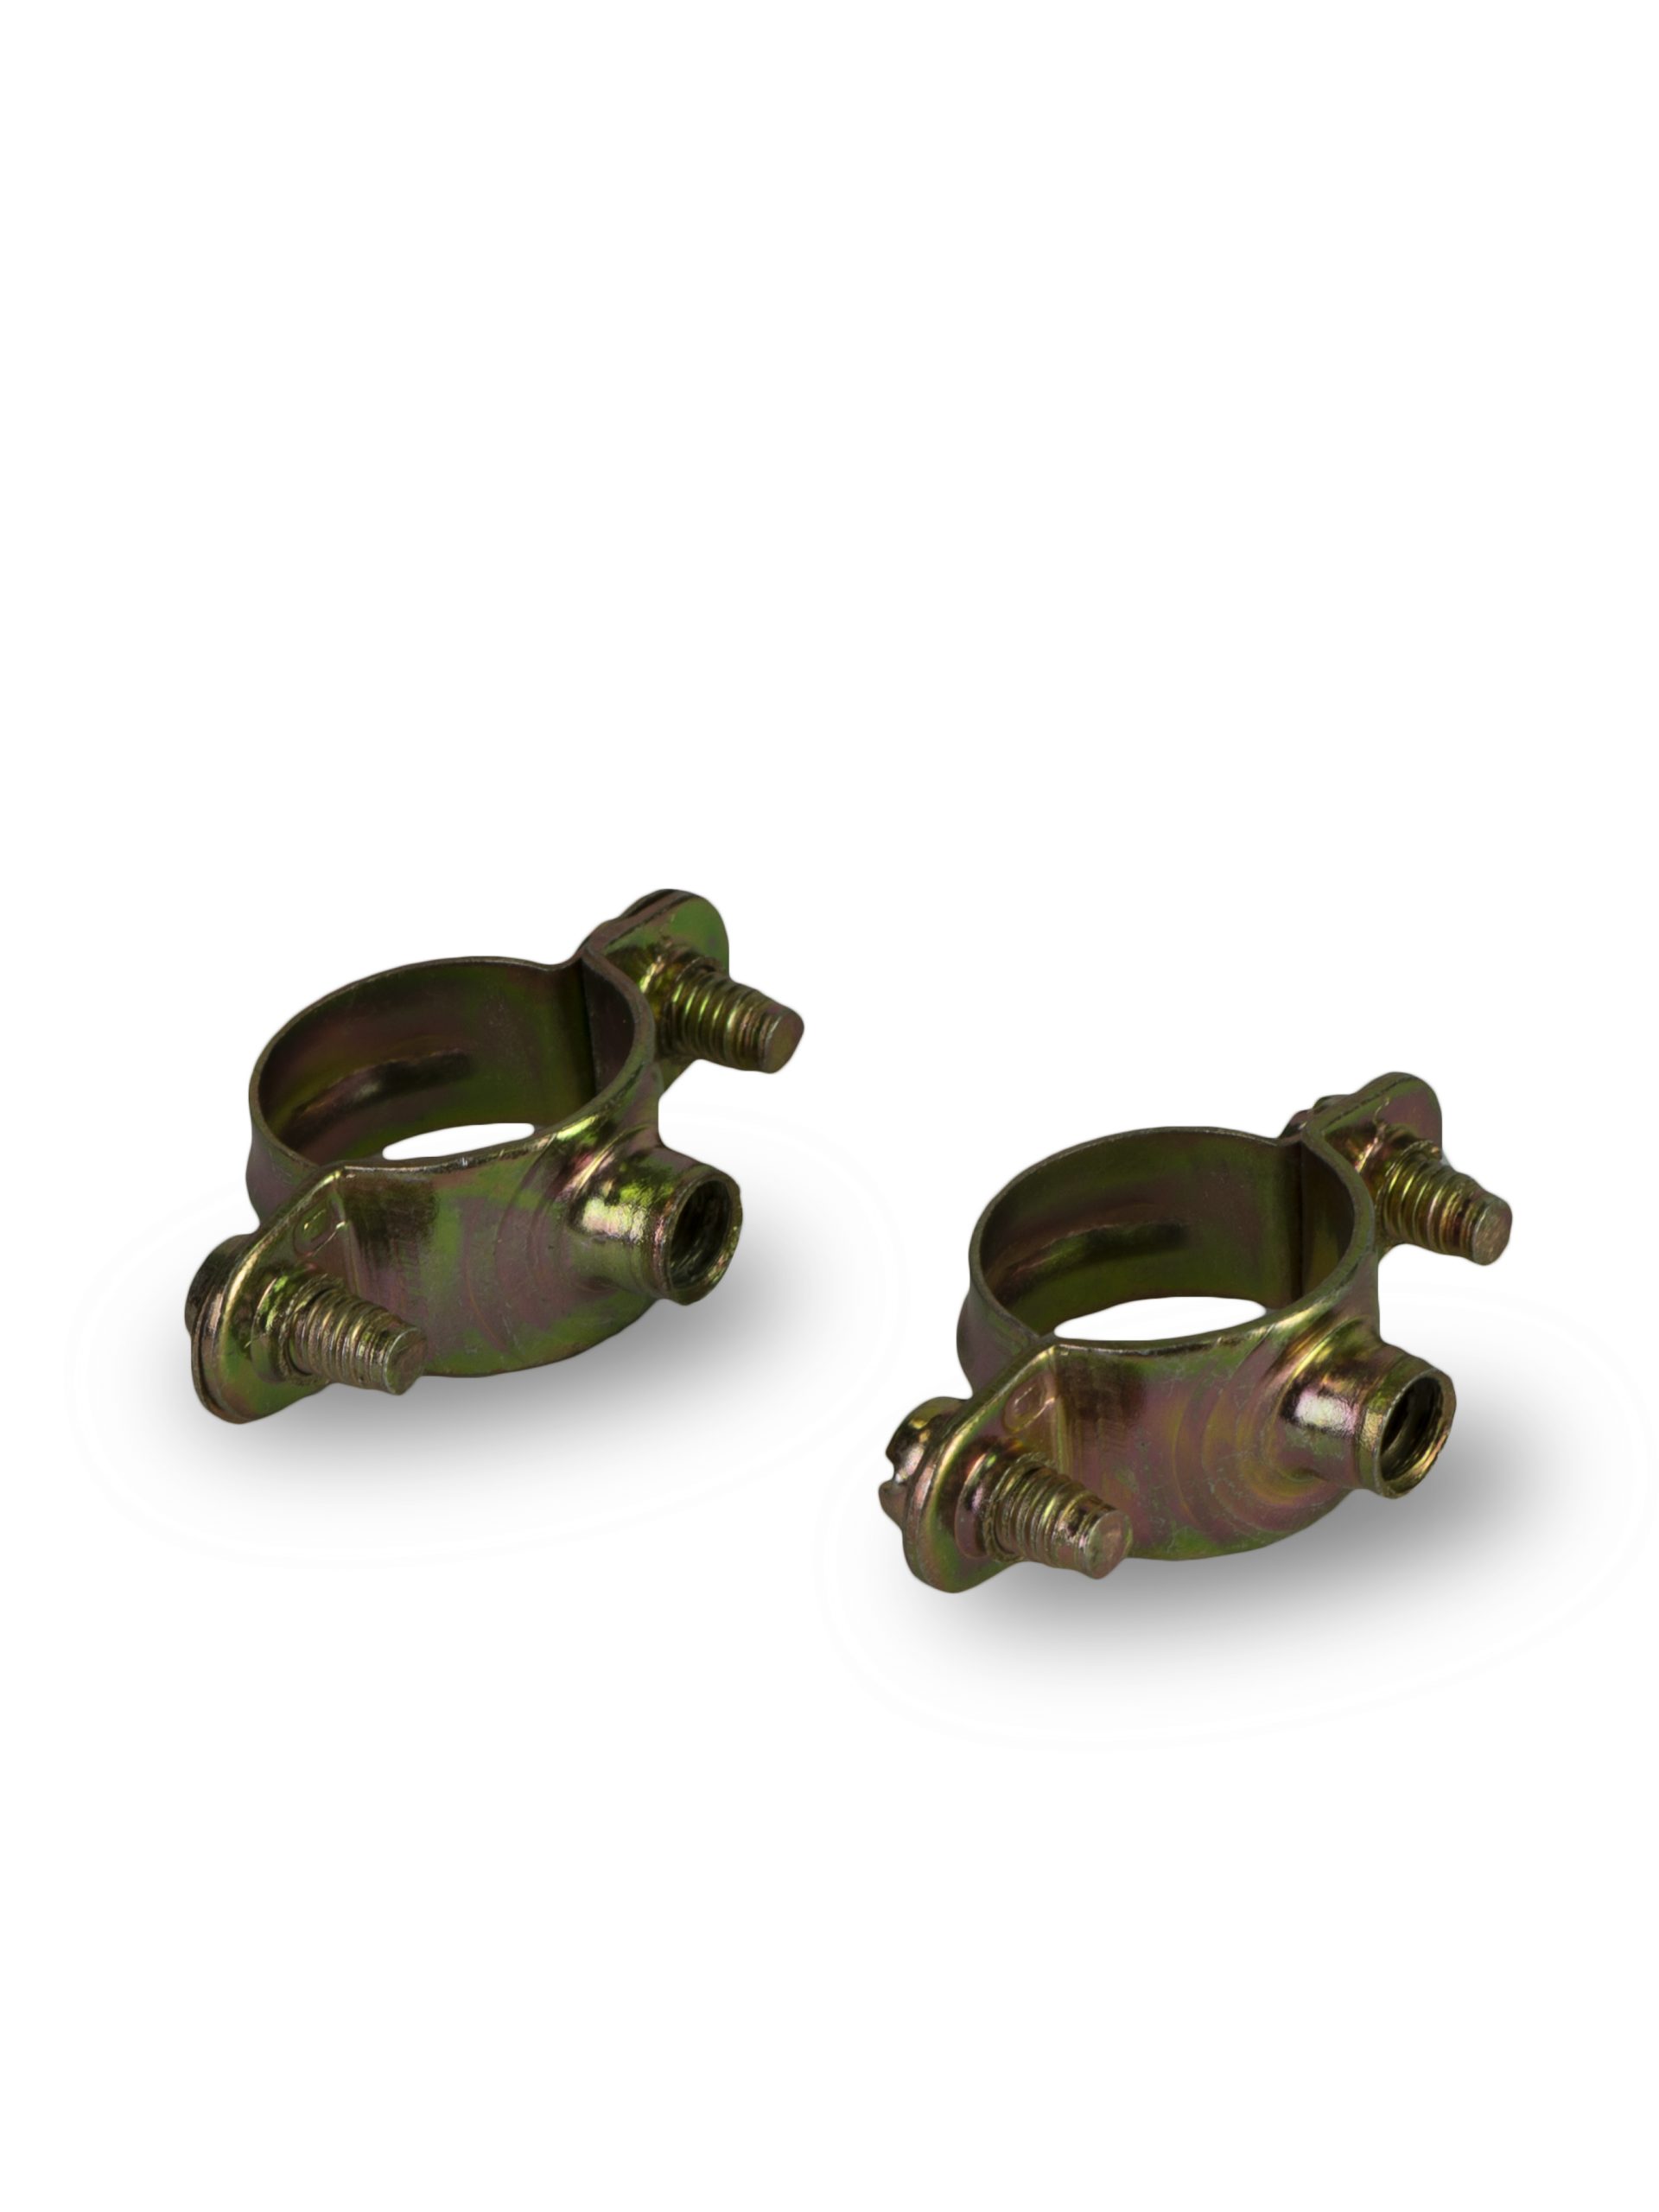 CLAMPS 32MM WITHOUT SCREW , SICOVIS from Gas Equipment Company Llc Abu Dhabi, UNITED ARAB EMIRATES